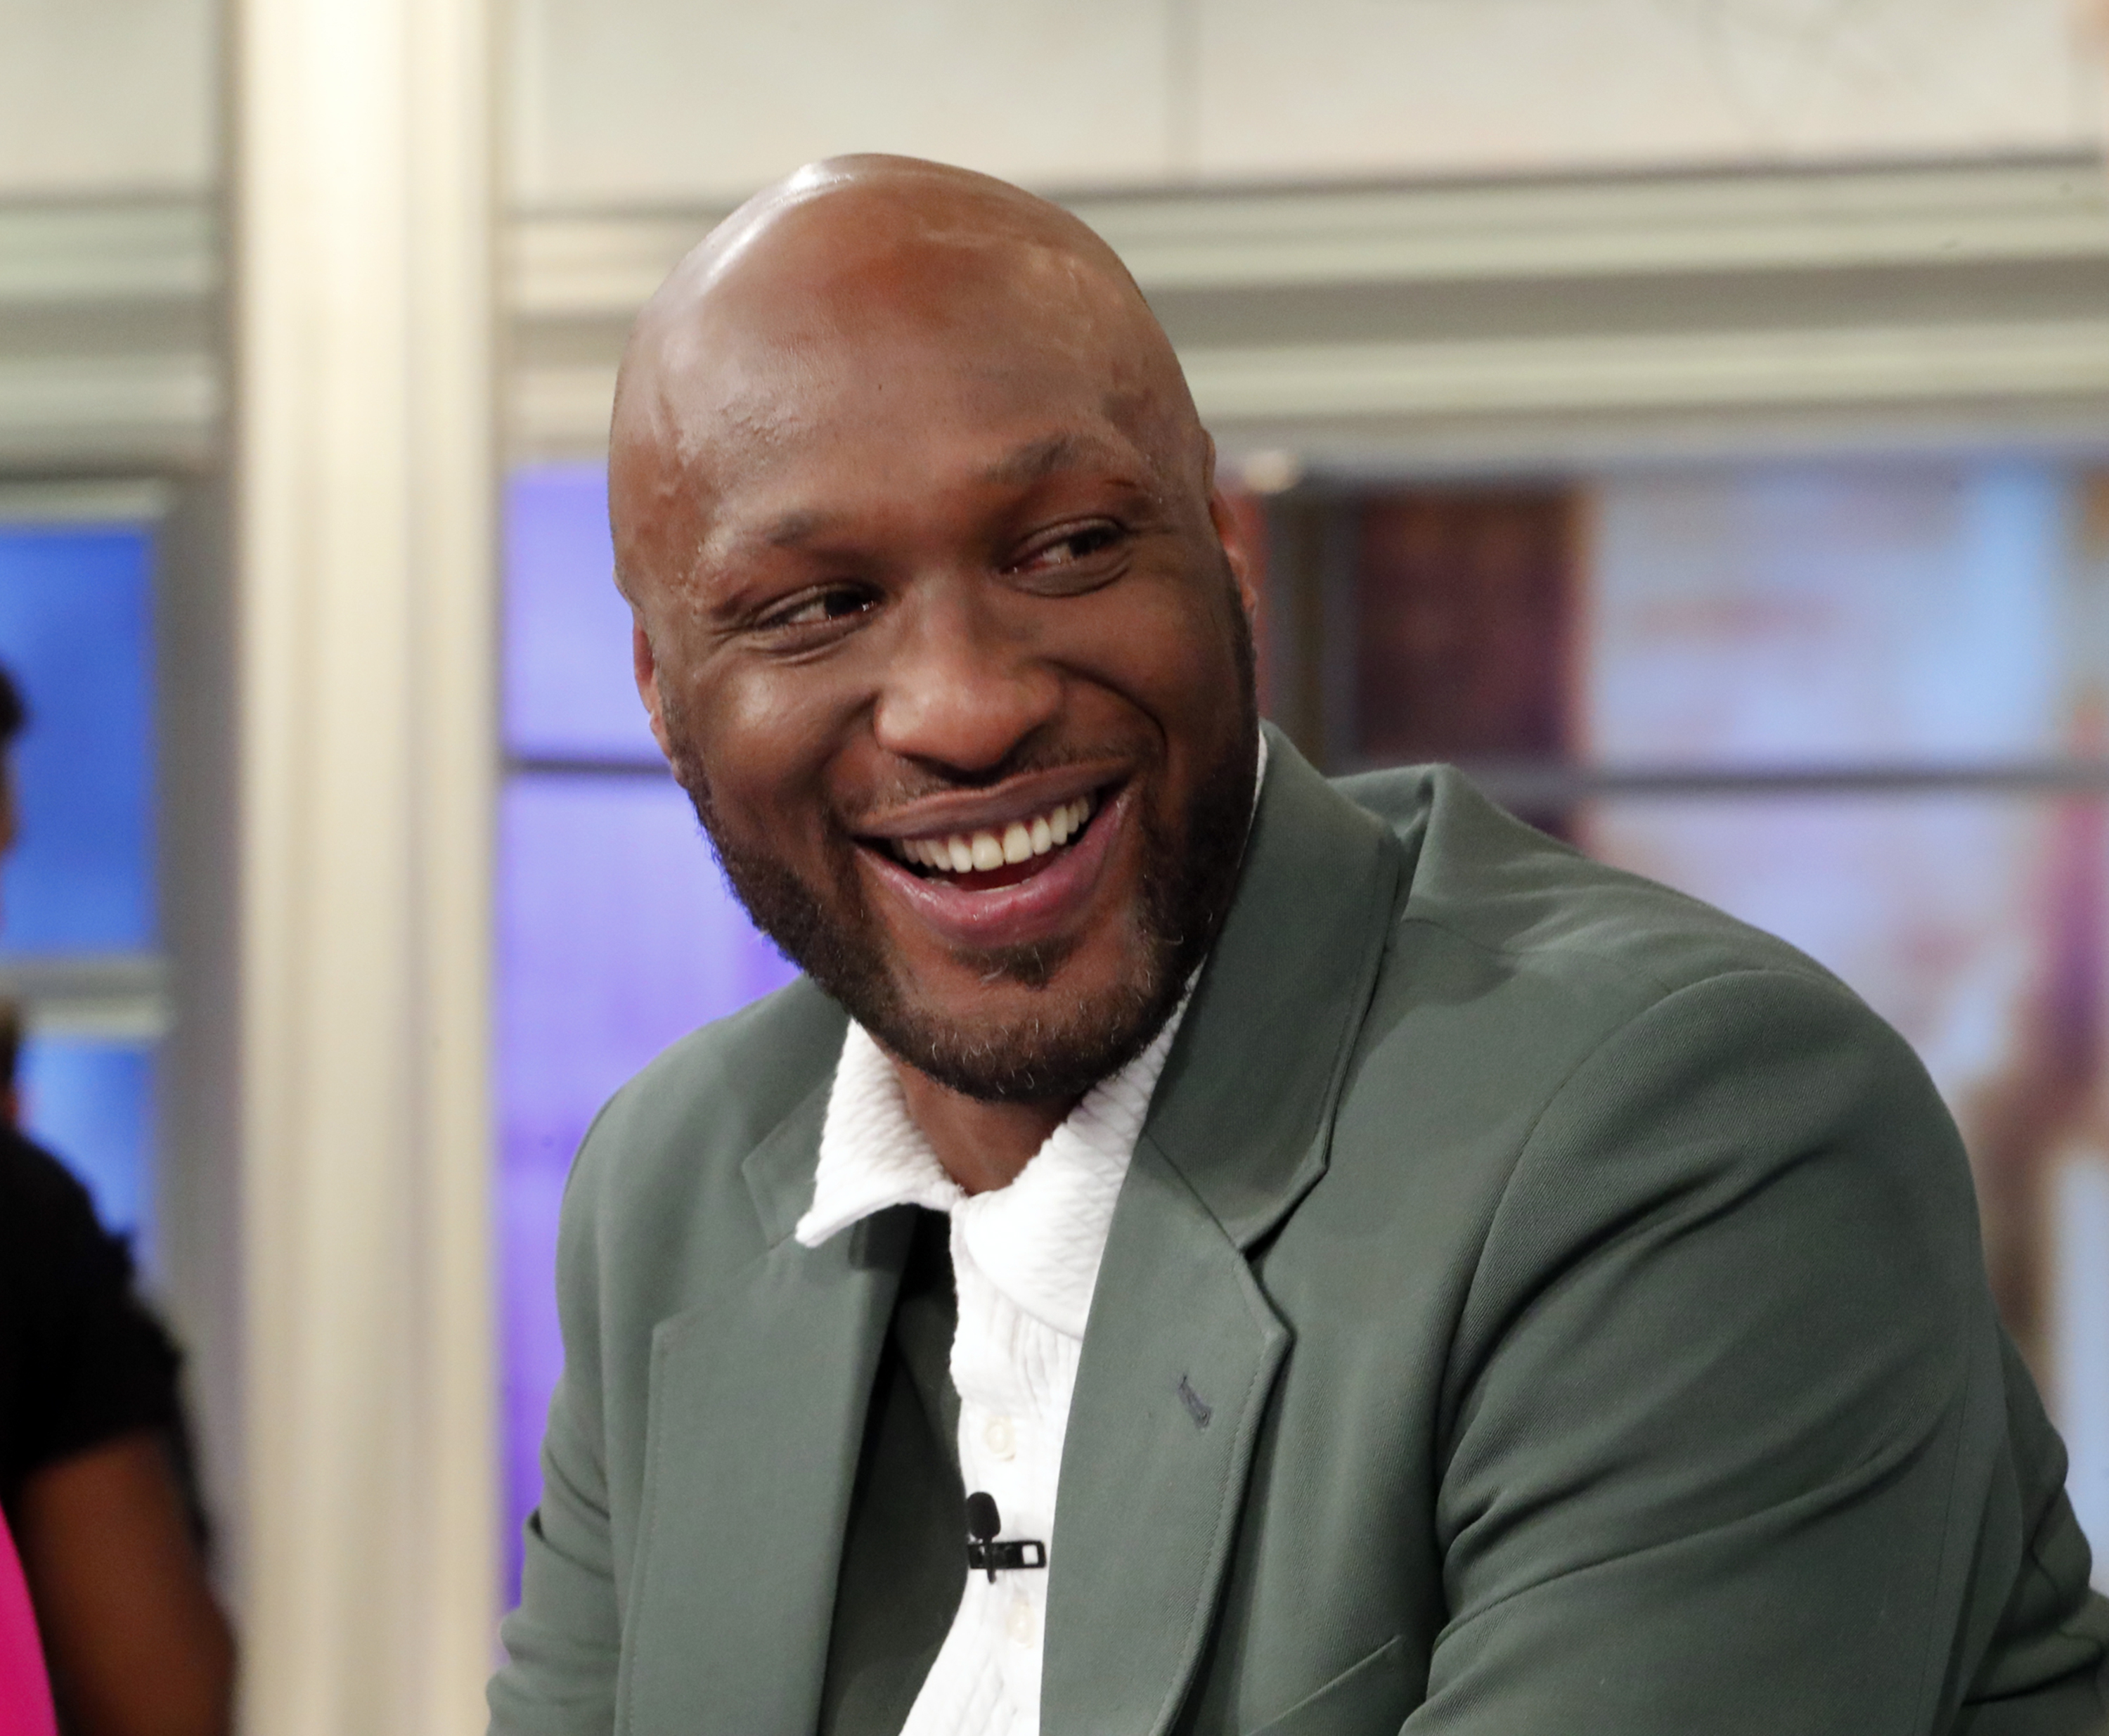 Lamar Odom on a season 22 episode of "The View" on May 28, 2019 | Source: Getty Images